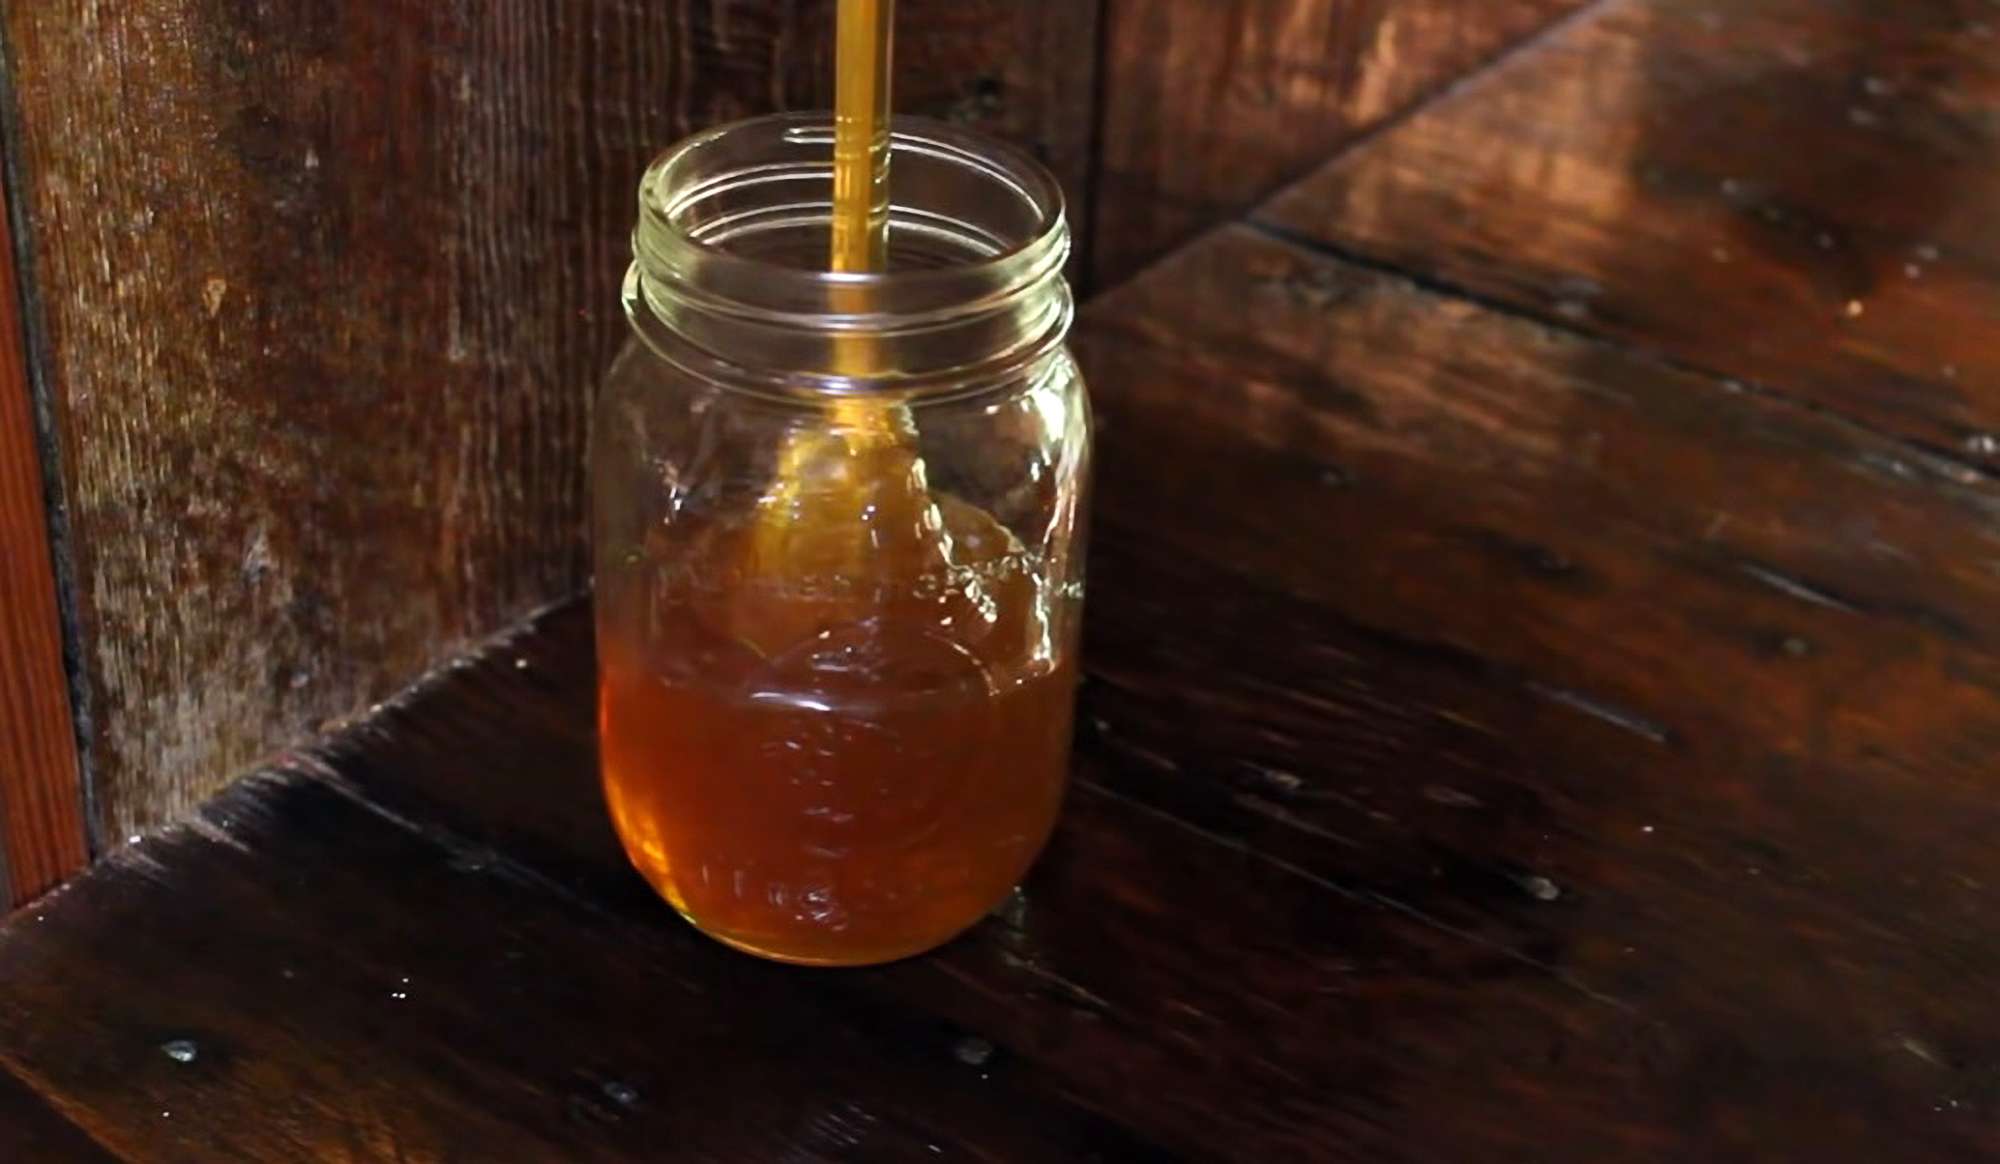 Fake Honey Imports ‘Put Europe’s Beekeepers At Risk’